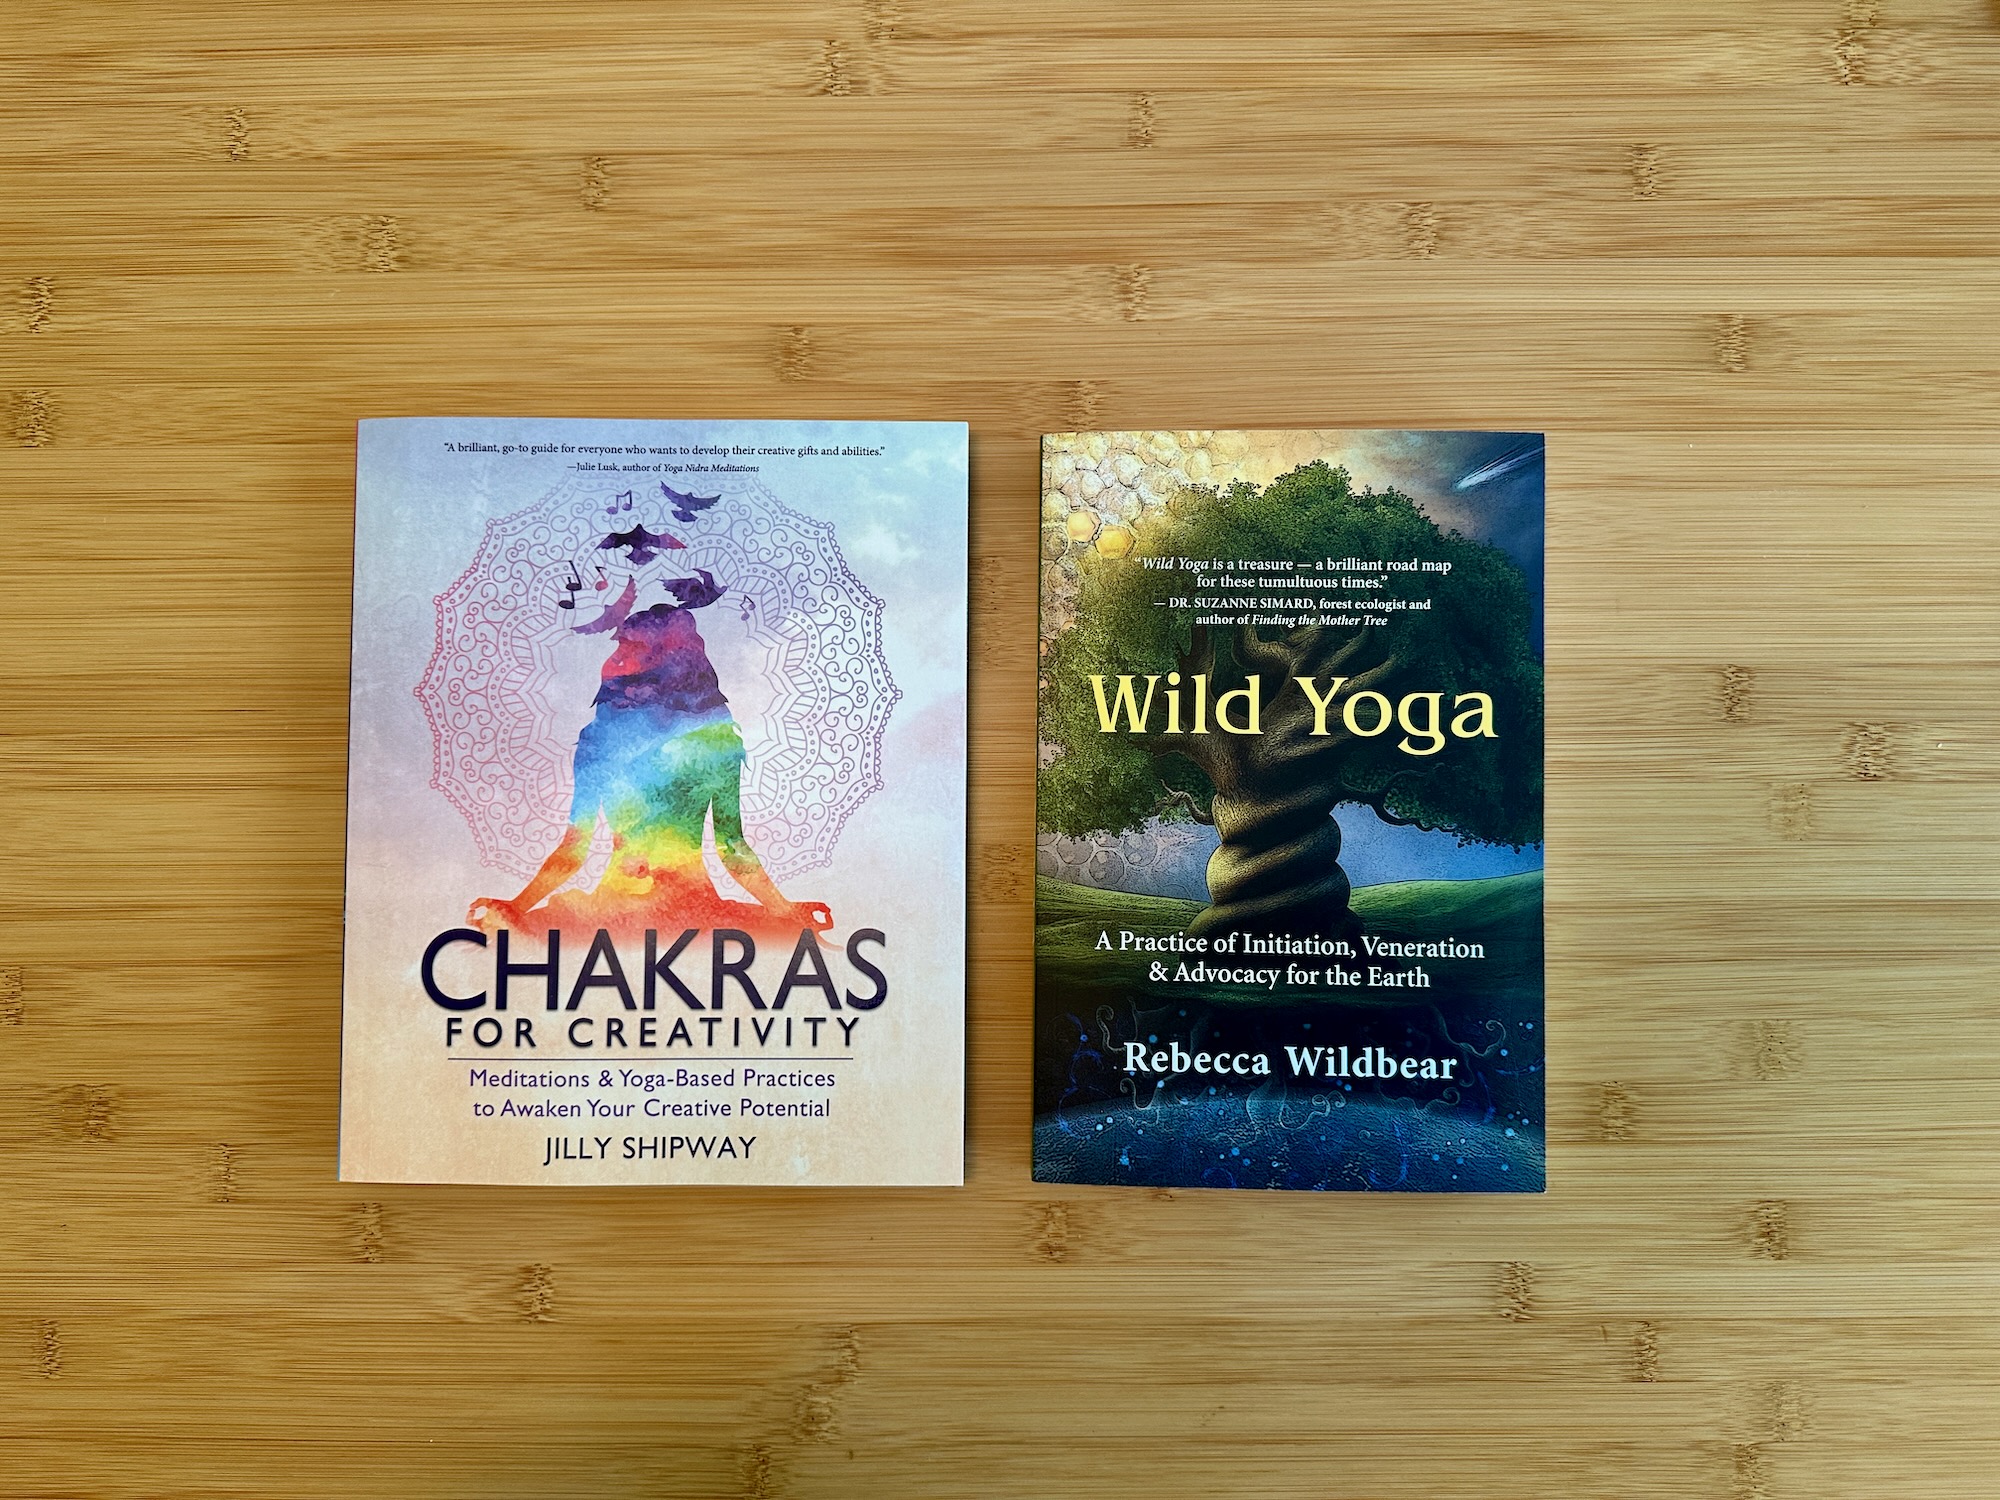 The books CHAKRAS FOR CREATIVITY and WILD YOGA sit side by side on a bamboo desk